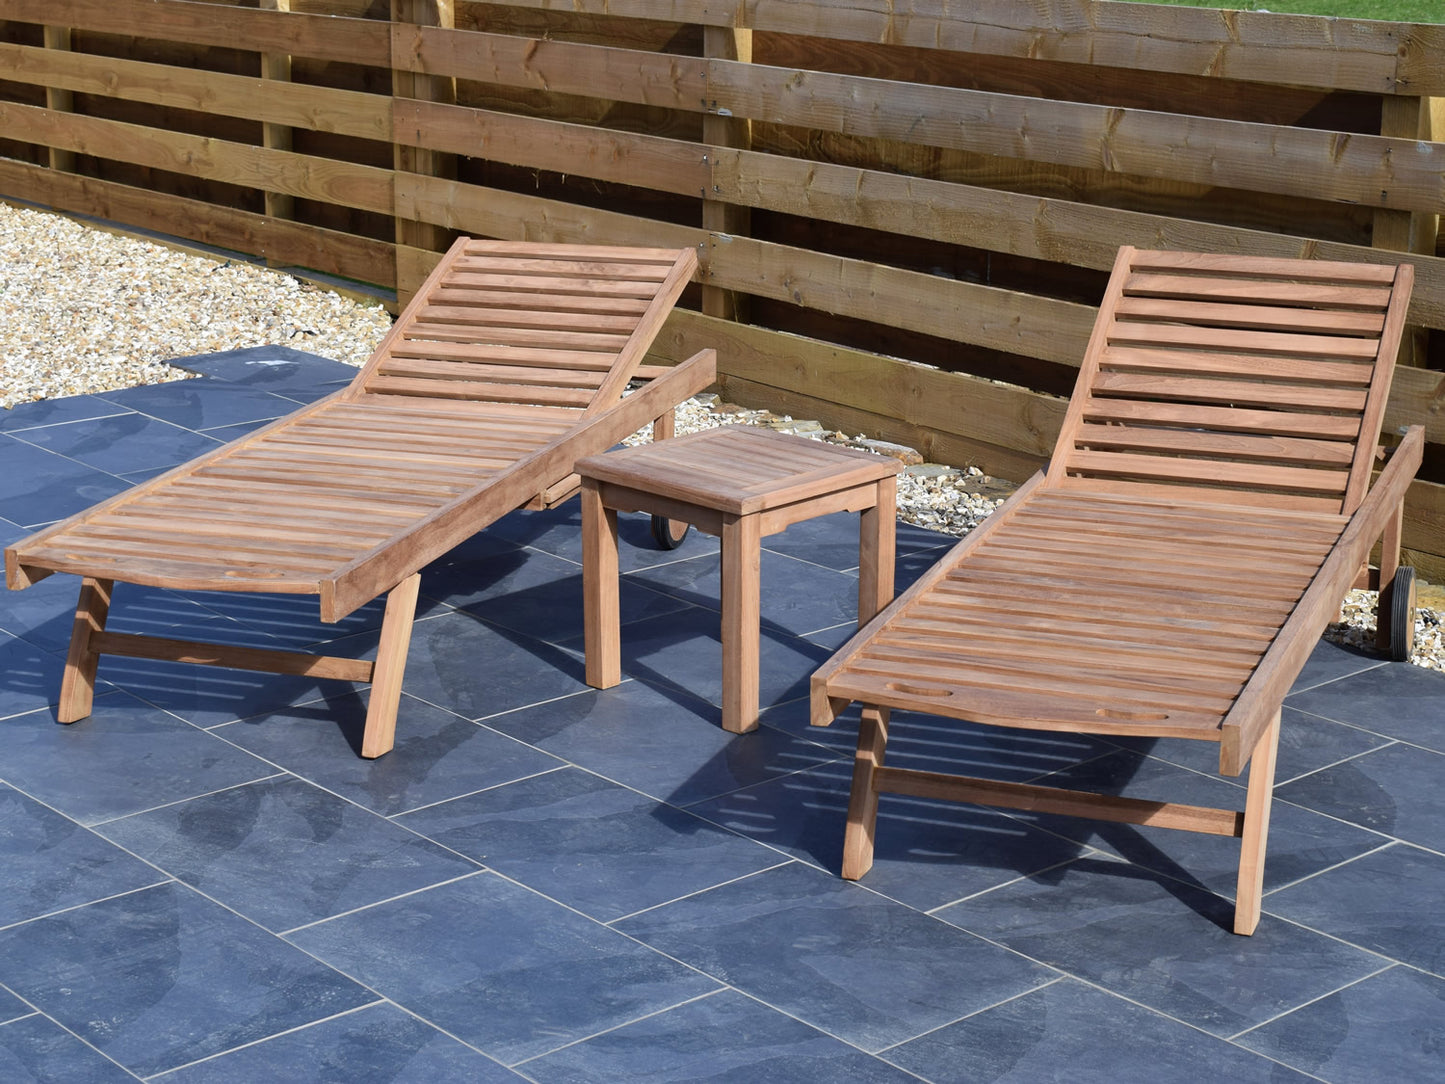 2 Seater Square Coffee Table Teak Set with Sunloungers